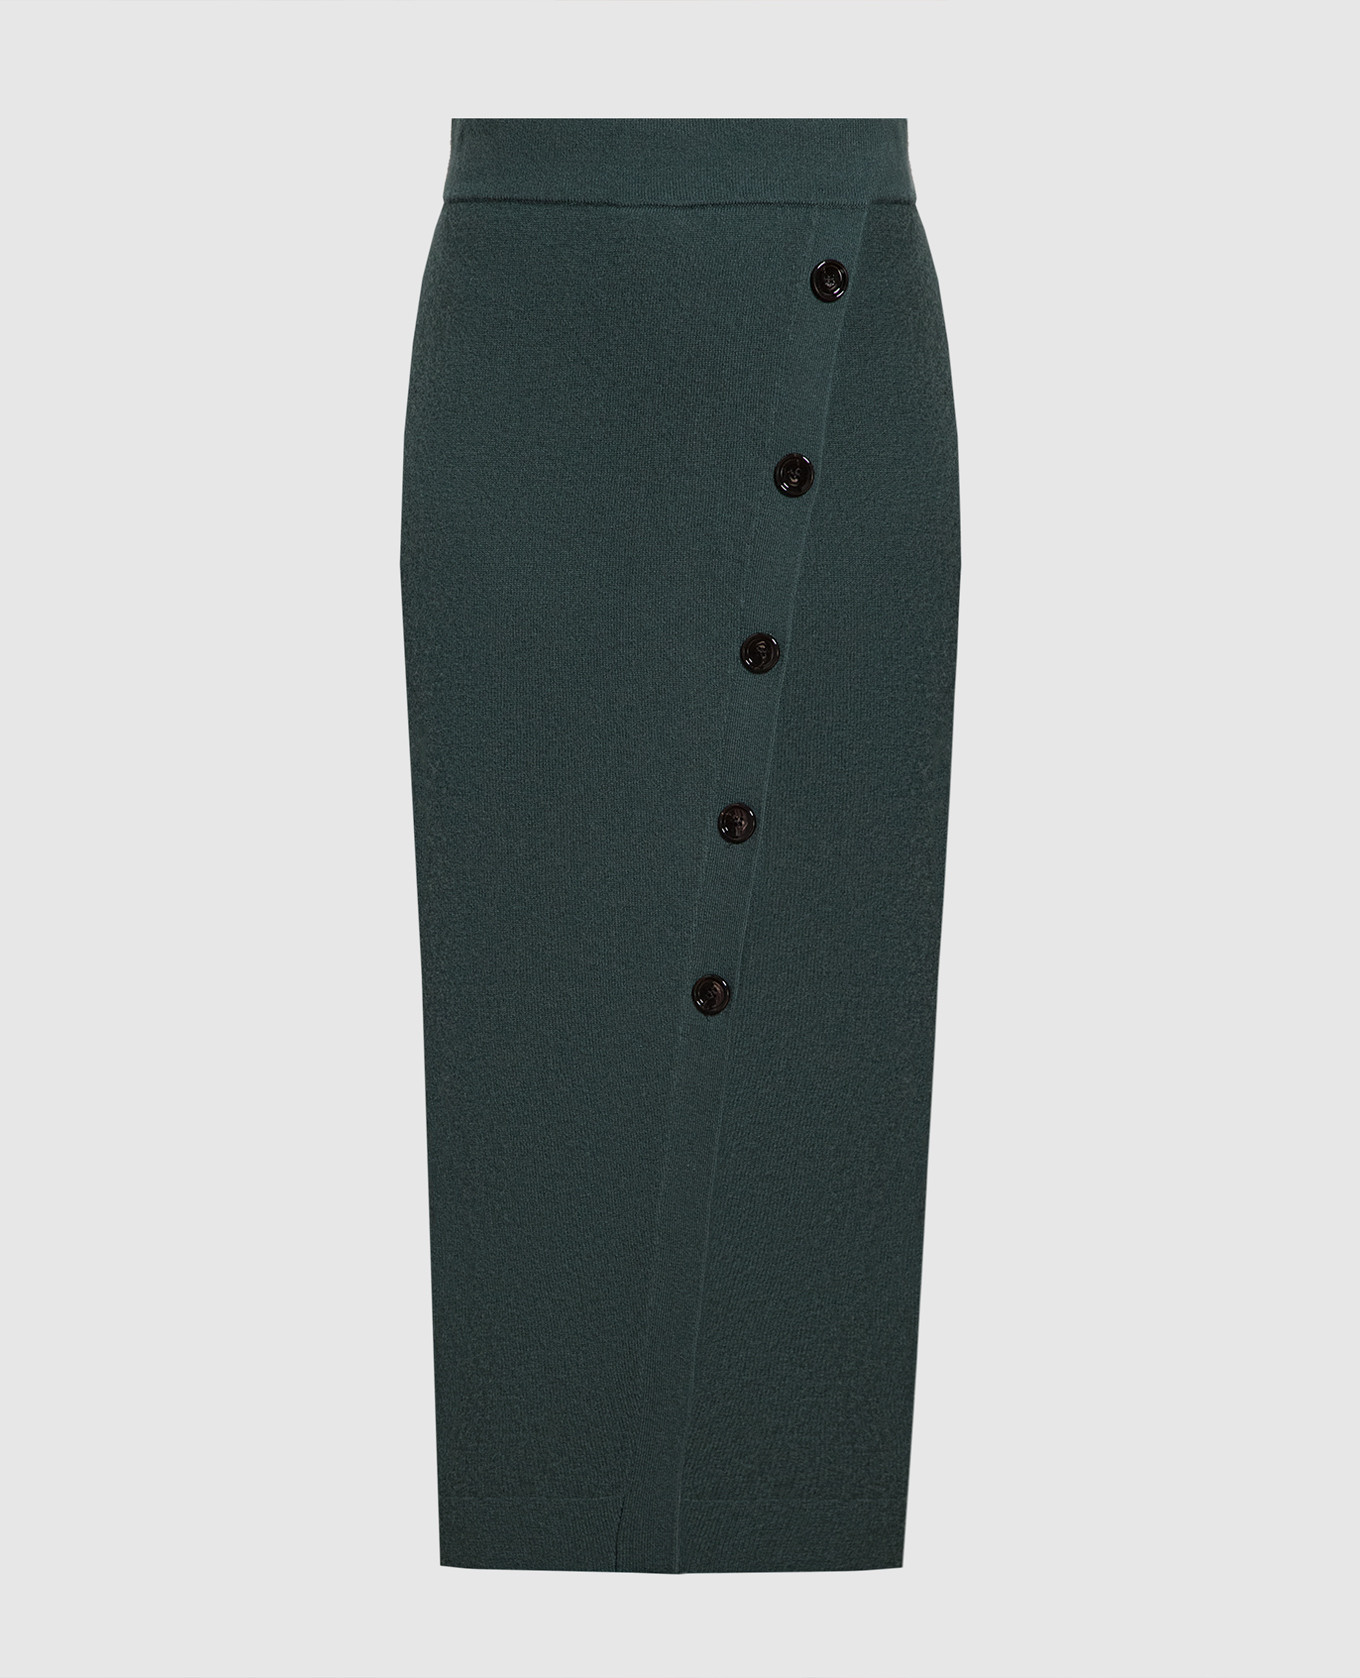 Green wool and cashmere skirt with slit